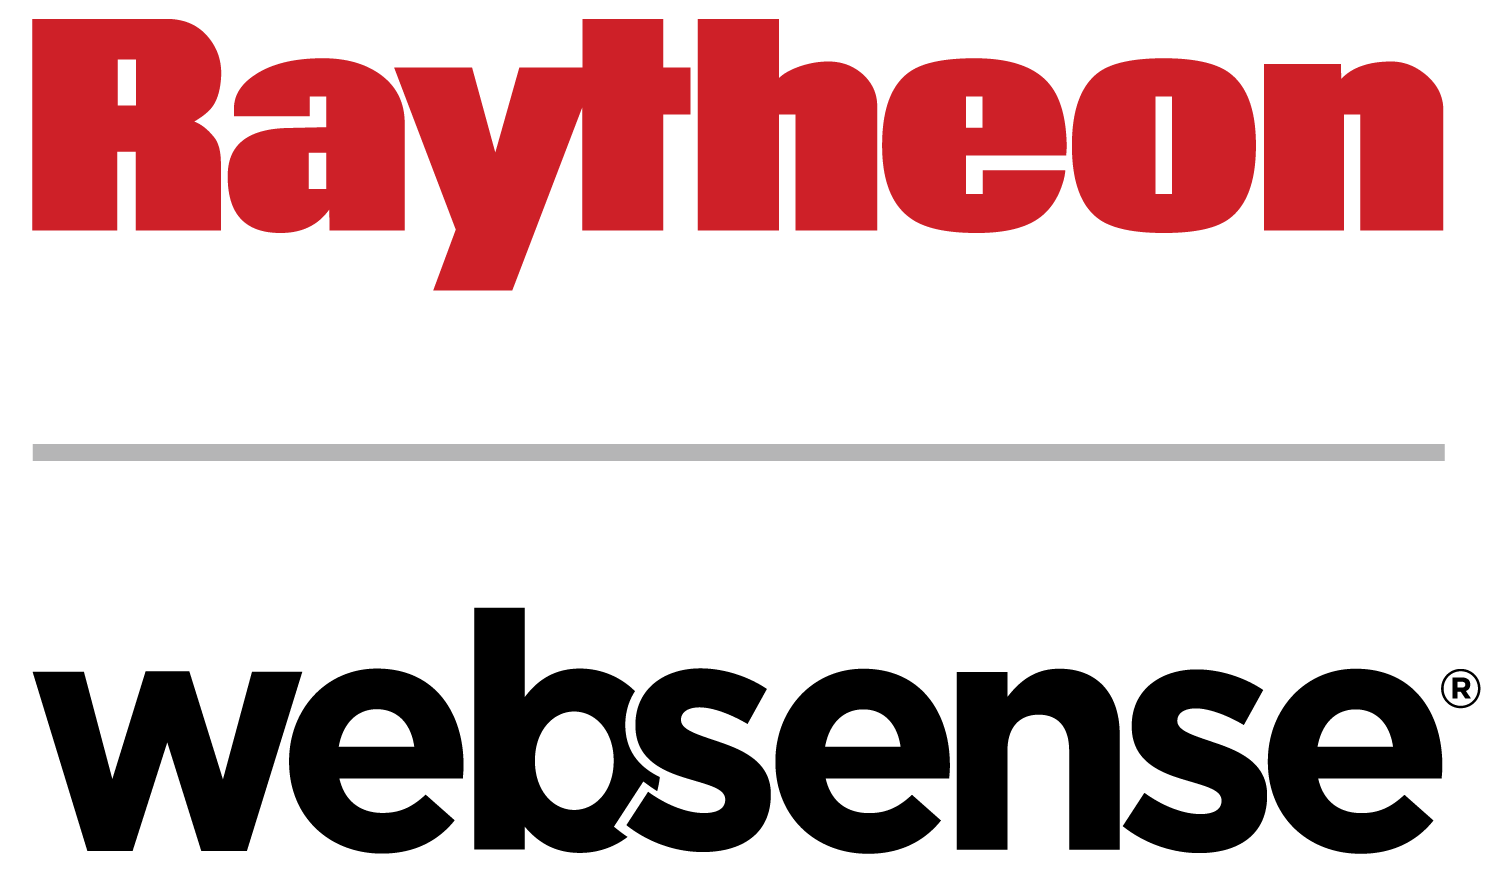 Raytheon Logo - Raytheon Merges with Websense, Rebrands To Forcepoint - Market Exclusive